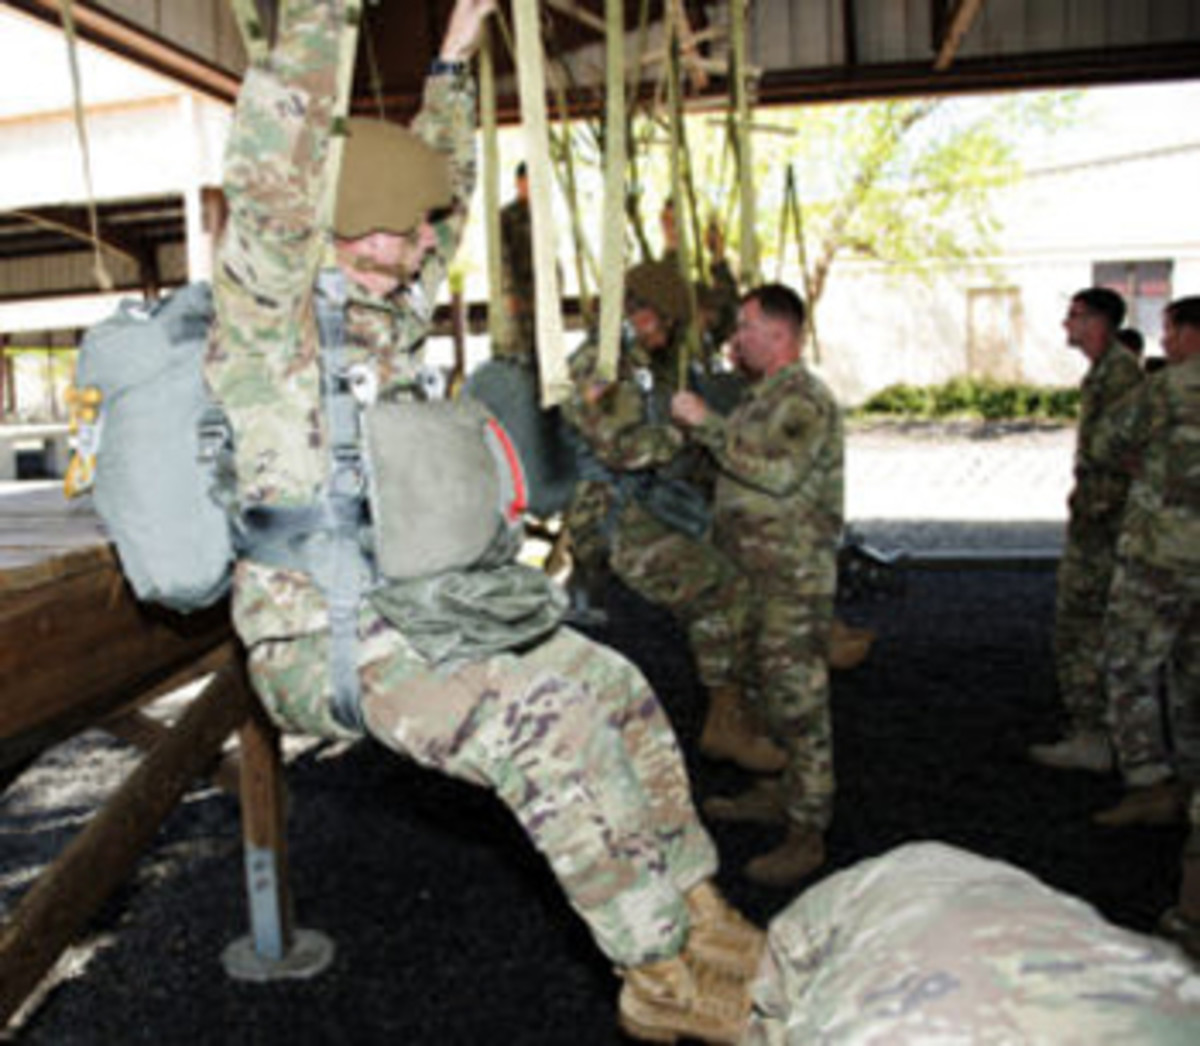  Soldiers participate in suspended harness training to ensure the new Integrated Head Protection System (IHPS) is suitable when performing canopy control and emergency procedures during operational testing. (Photo by Michael Zigmond, Audio Visual Production Specialist, Airborne and Special Operations Test Directorate, U.S. Army Operational Test Command)